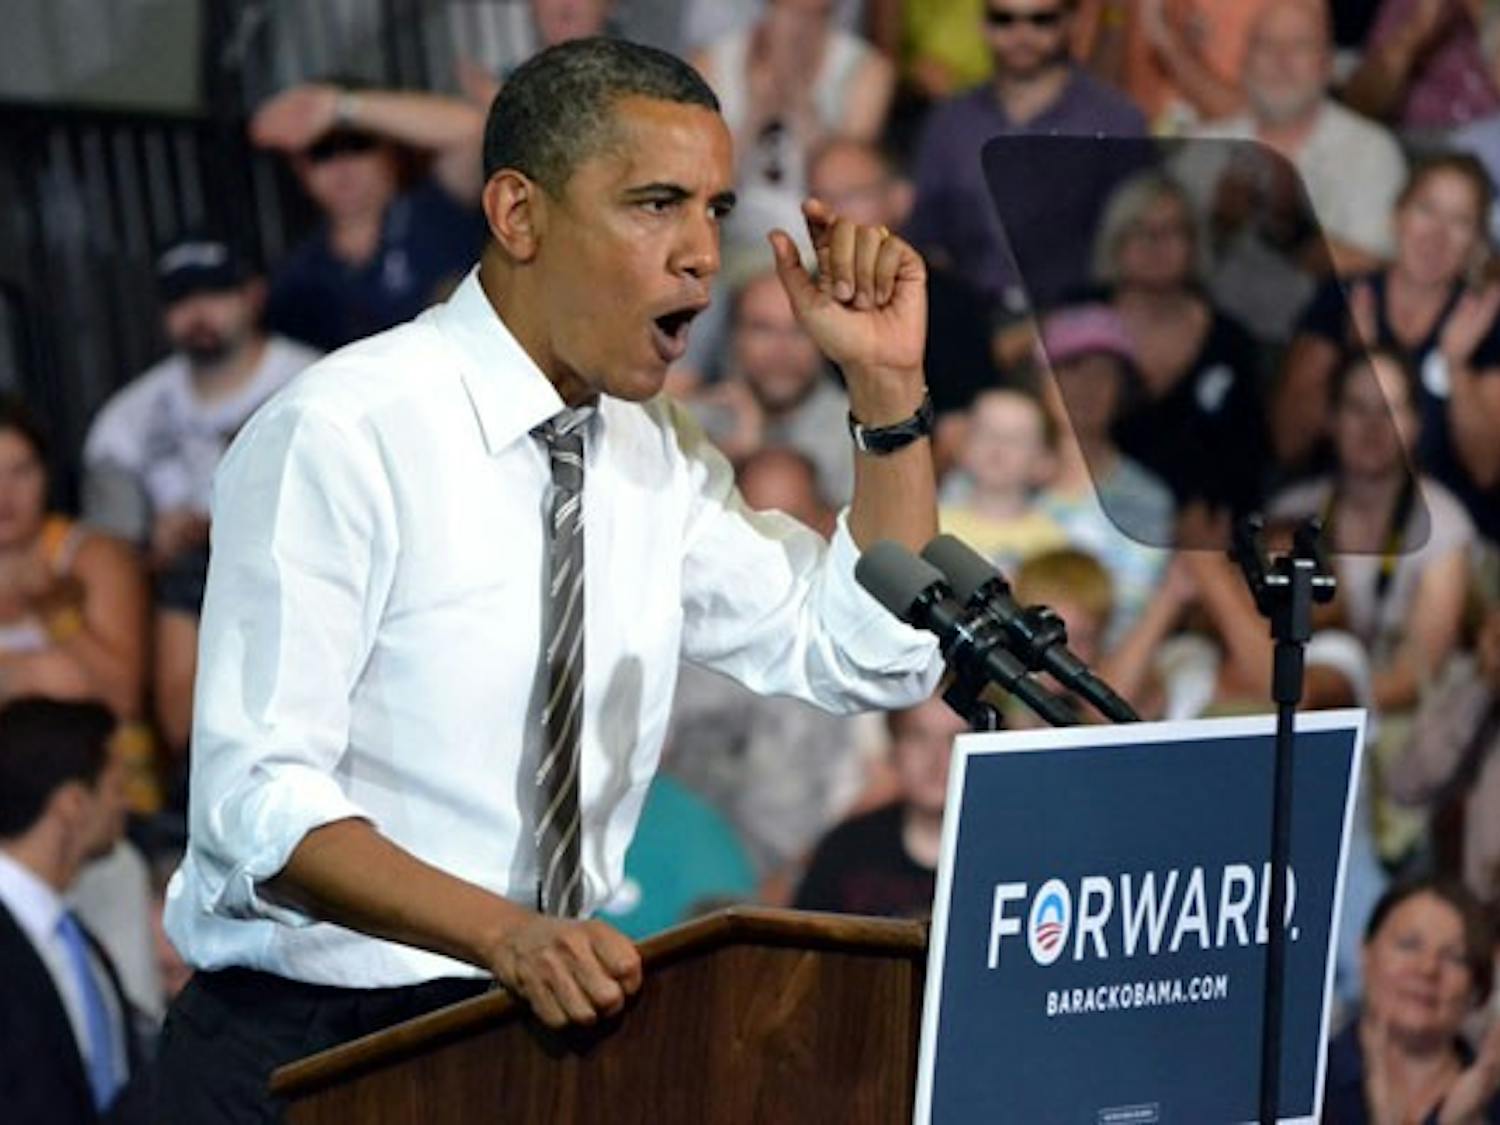 President Barack Obama spoke to a crowd of supporters on July 10 in Cedar Rapids, Iowa. Wednesday's presidential debate strongly focused on the state of the economy as well as the current health care system. (Photo by Kirsten Kraklio)